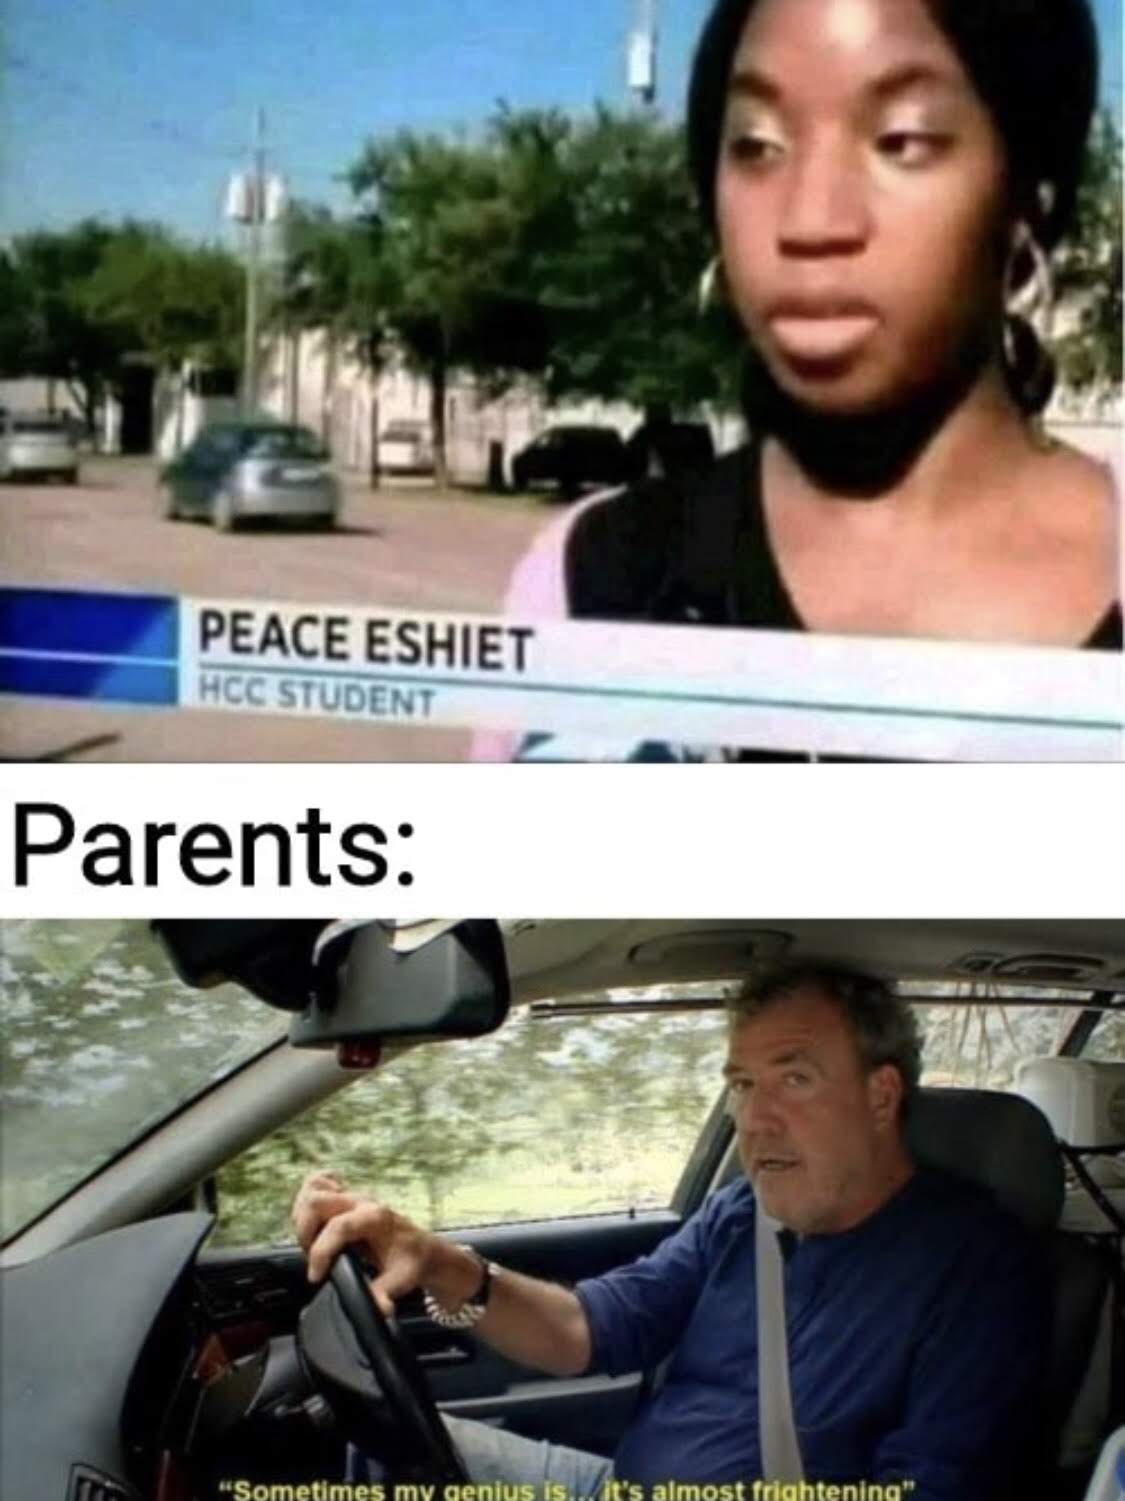 2018 funny memes - Peace Eshiet Hcc Student Parents "Sometimes my genius is dit's almost frightening"